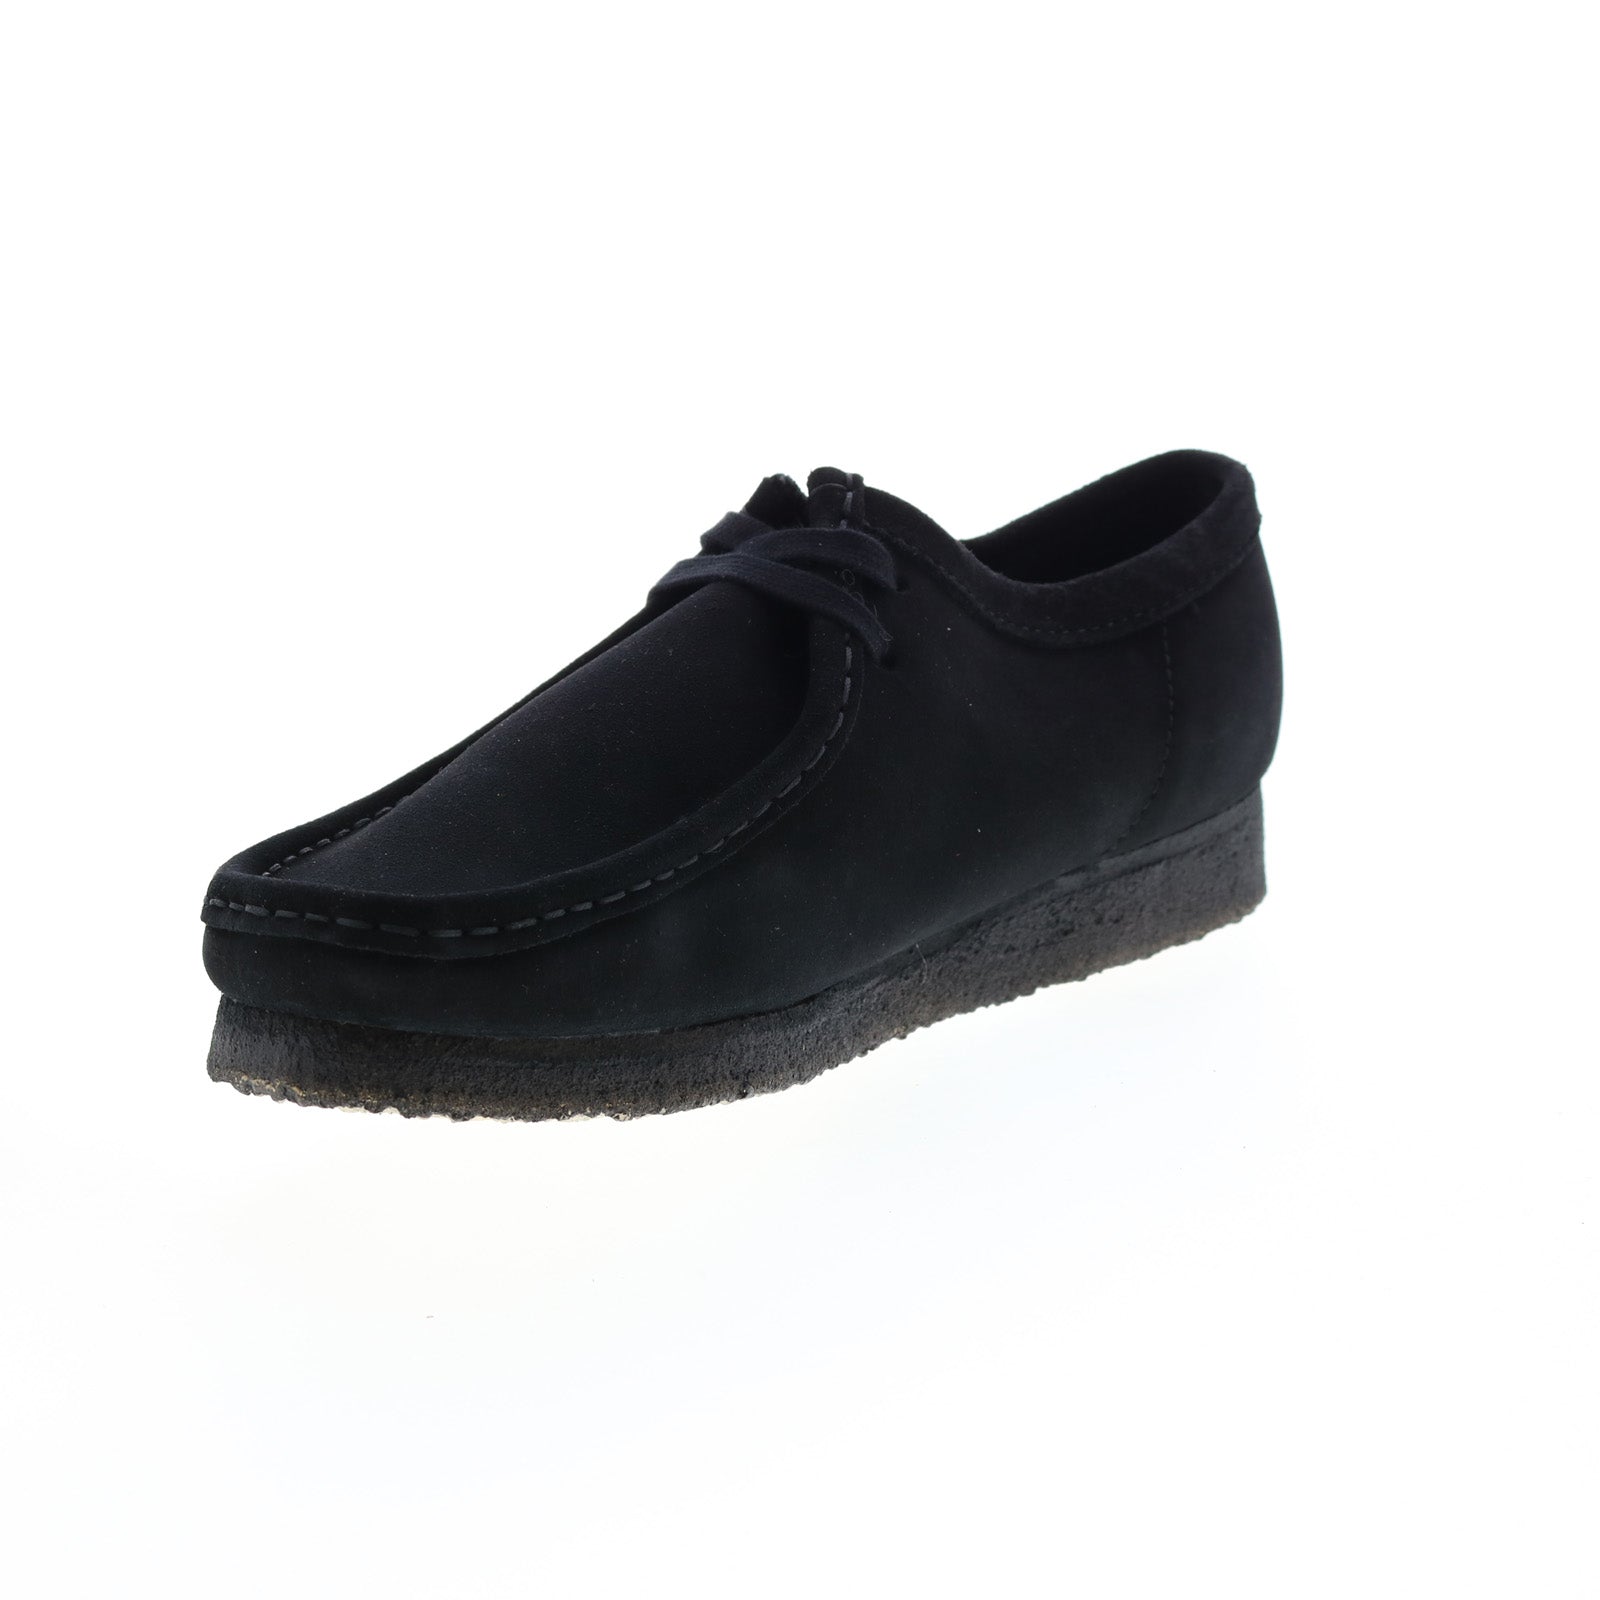 Clarks Wallabee 26155519 Mens Black Suede Lace Up Oxfords